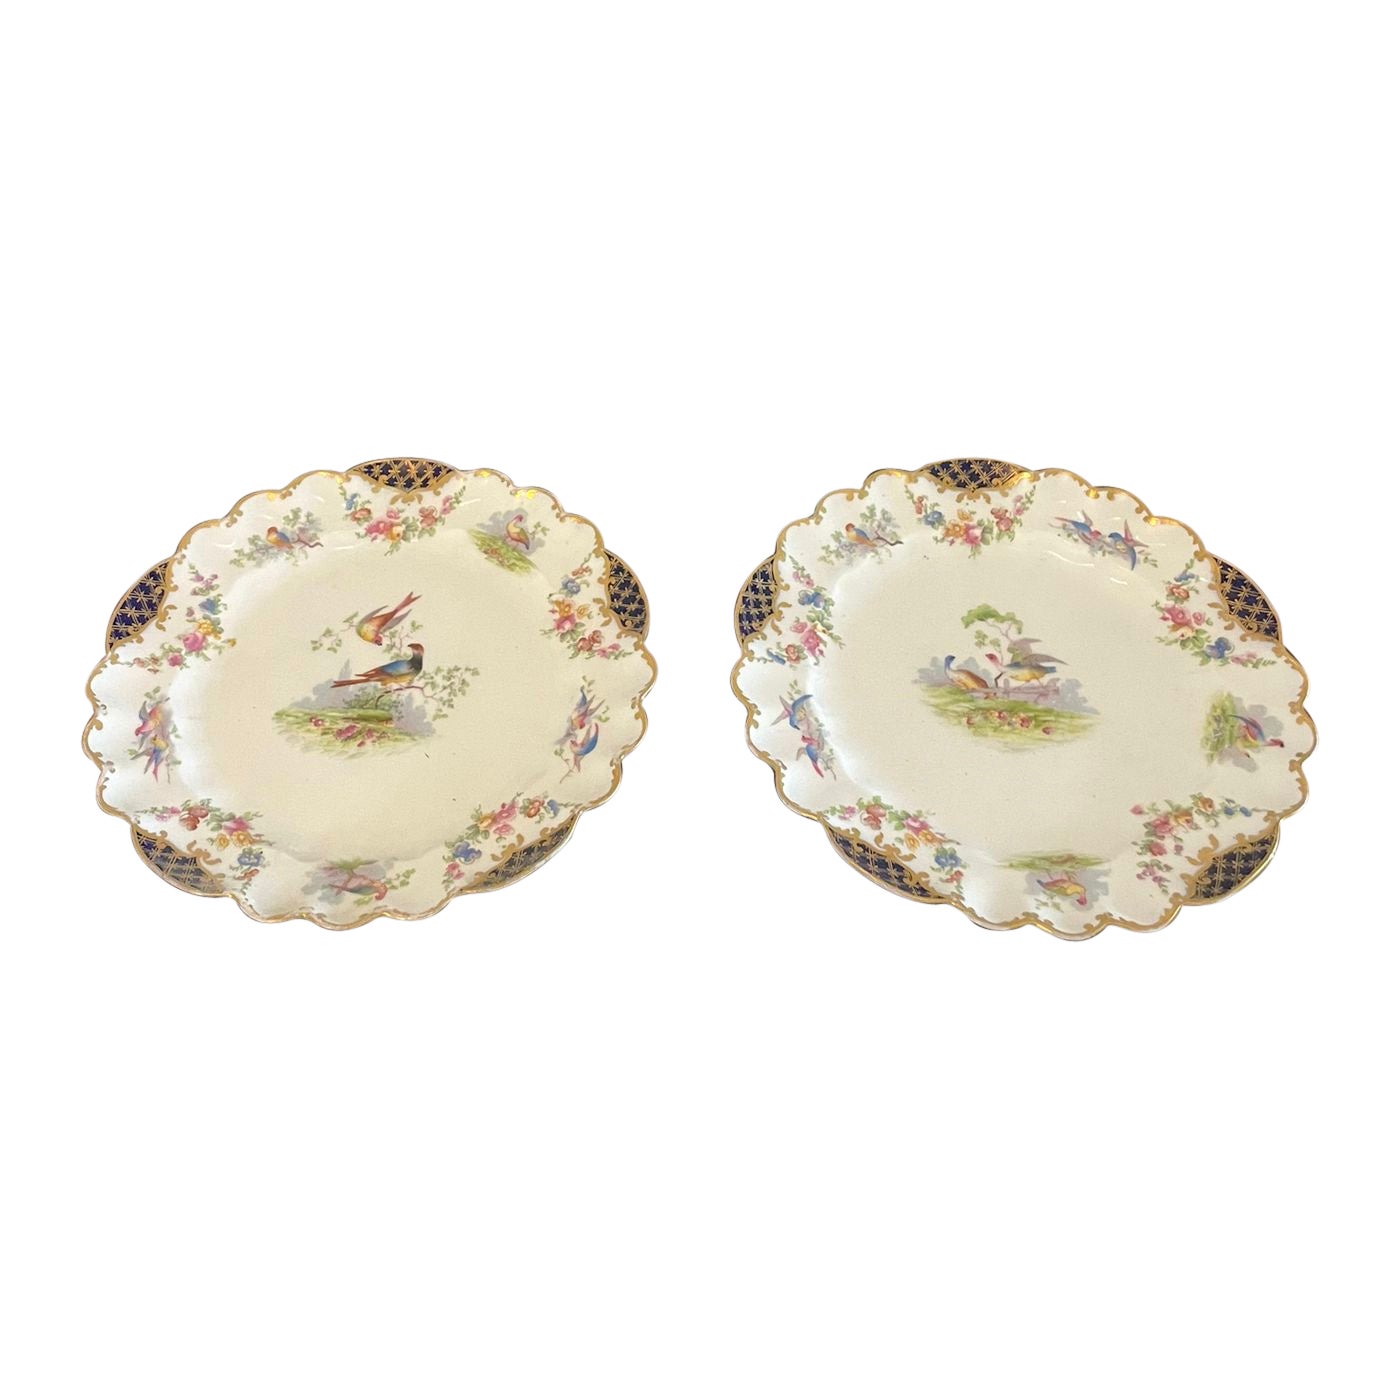  Quality Pair of Antique Hand Painted Crescent China Plates